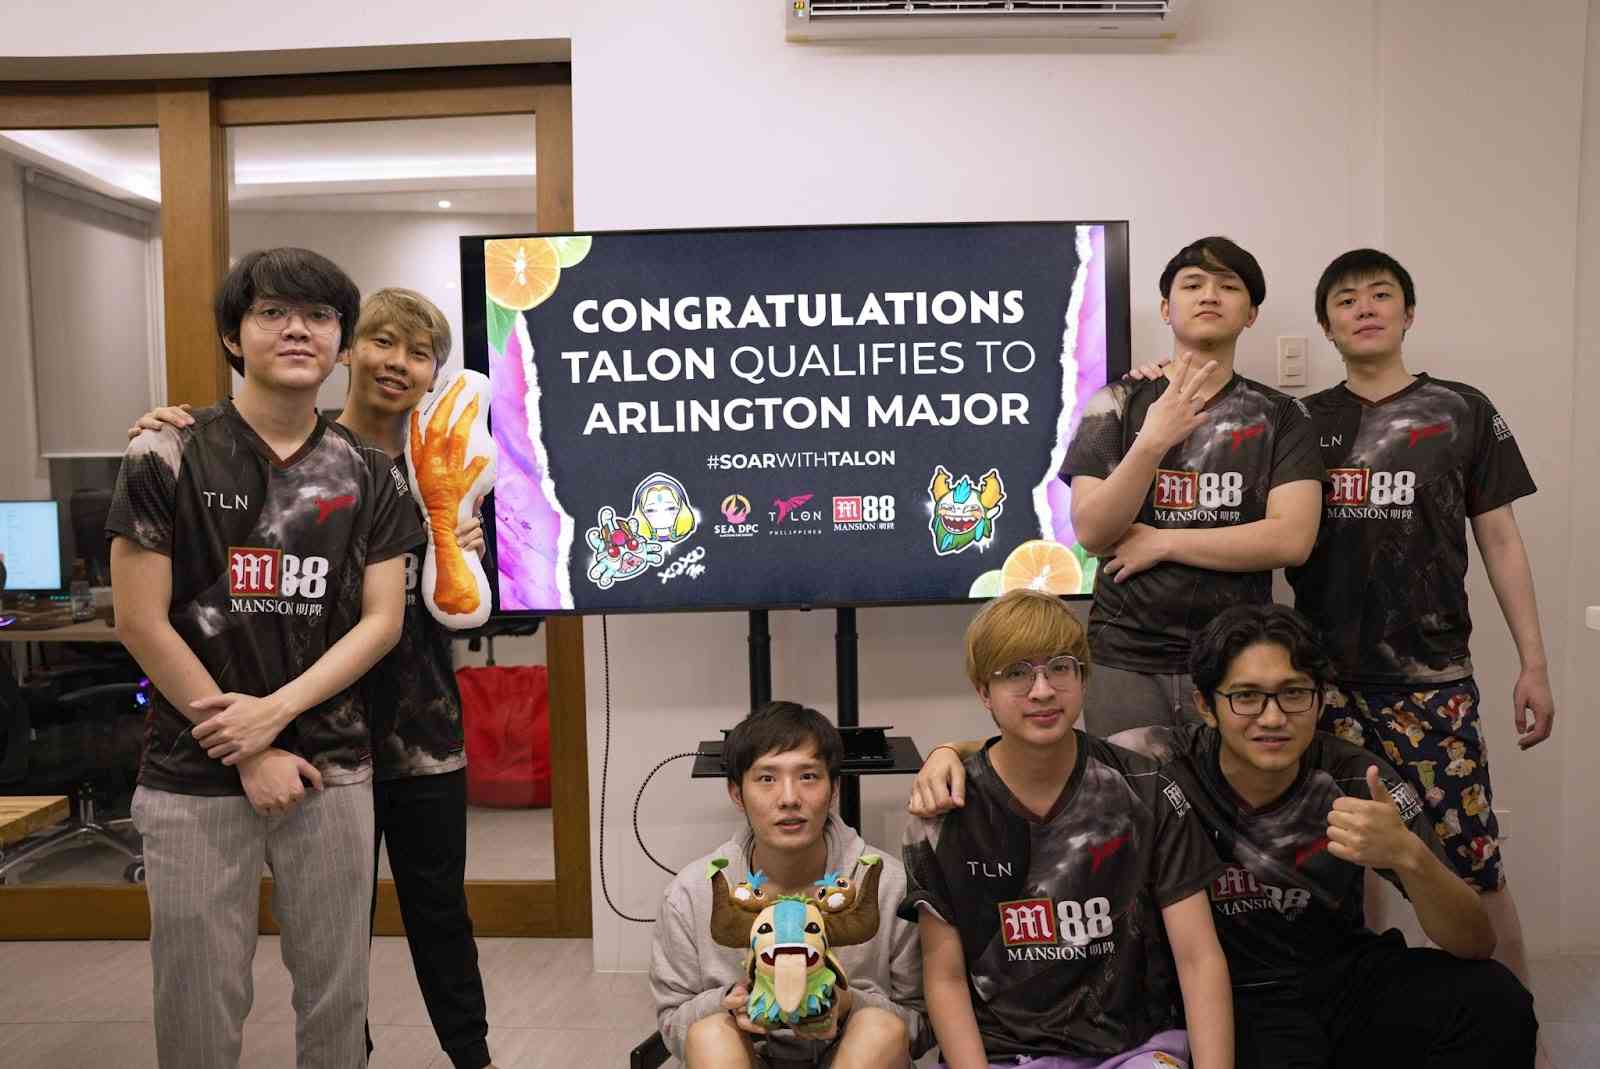 kpii and the rest of the Talon Esports roster pose around a large monitor displaying the words "Congratulations Talon Qualifies to Arlington Major"